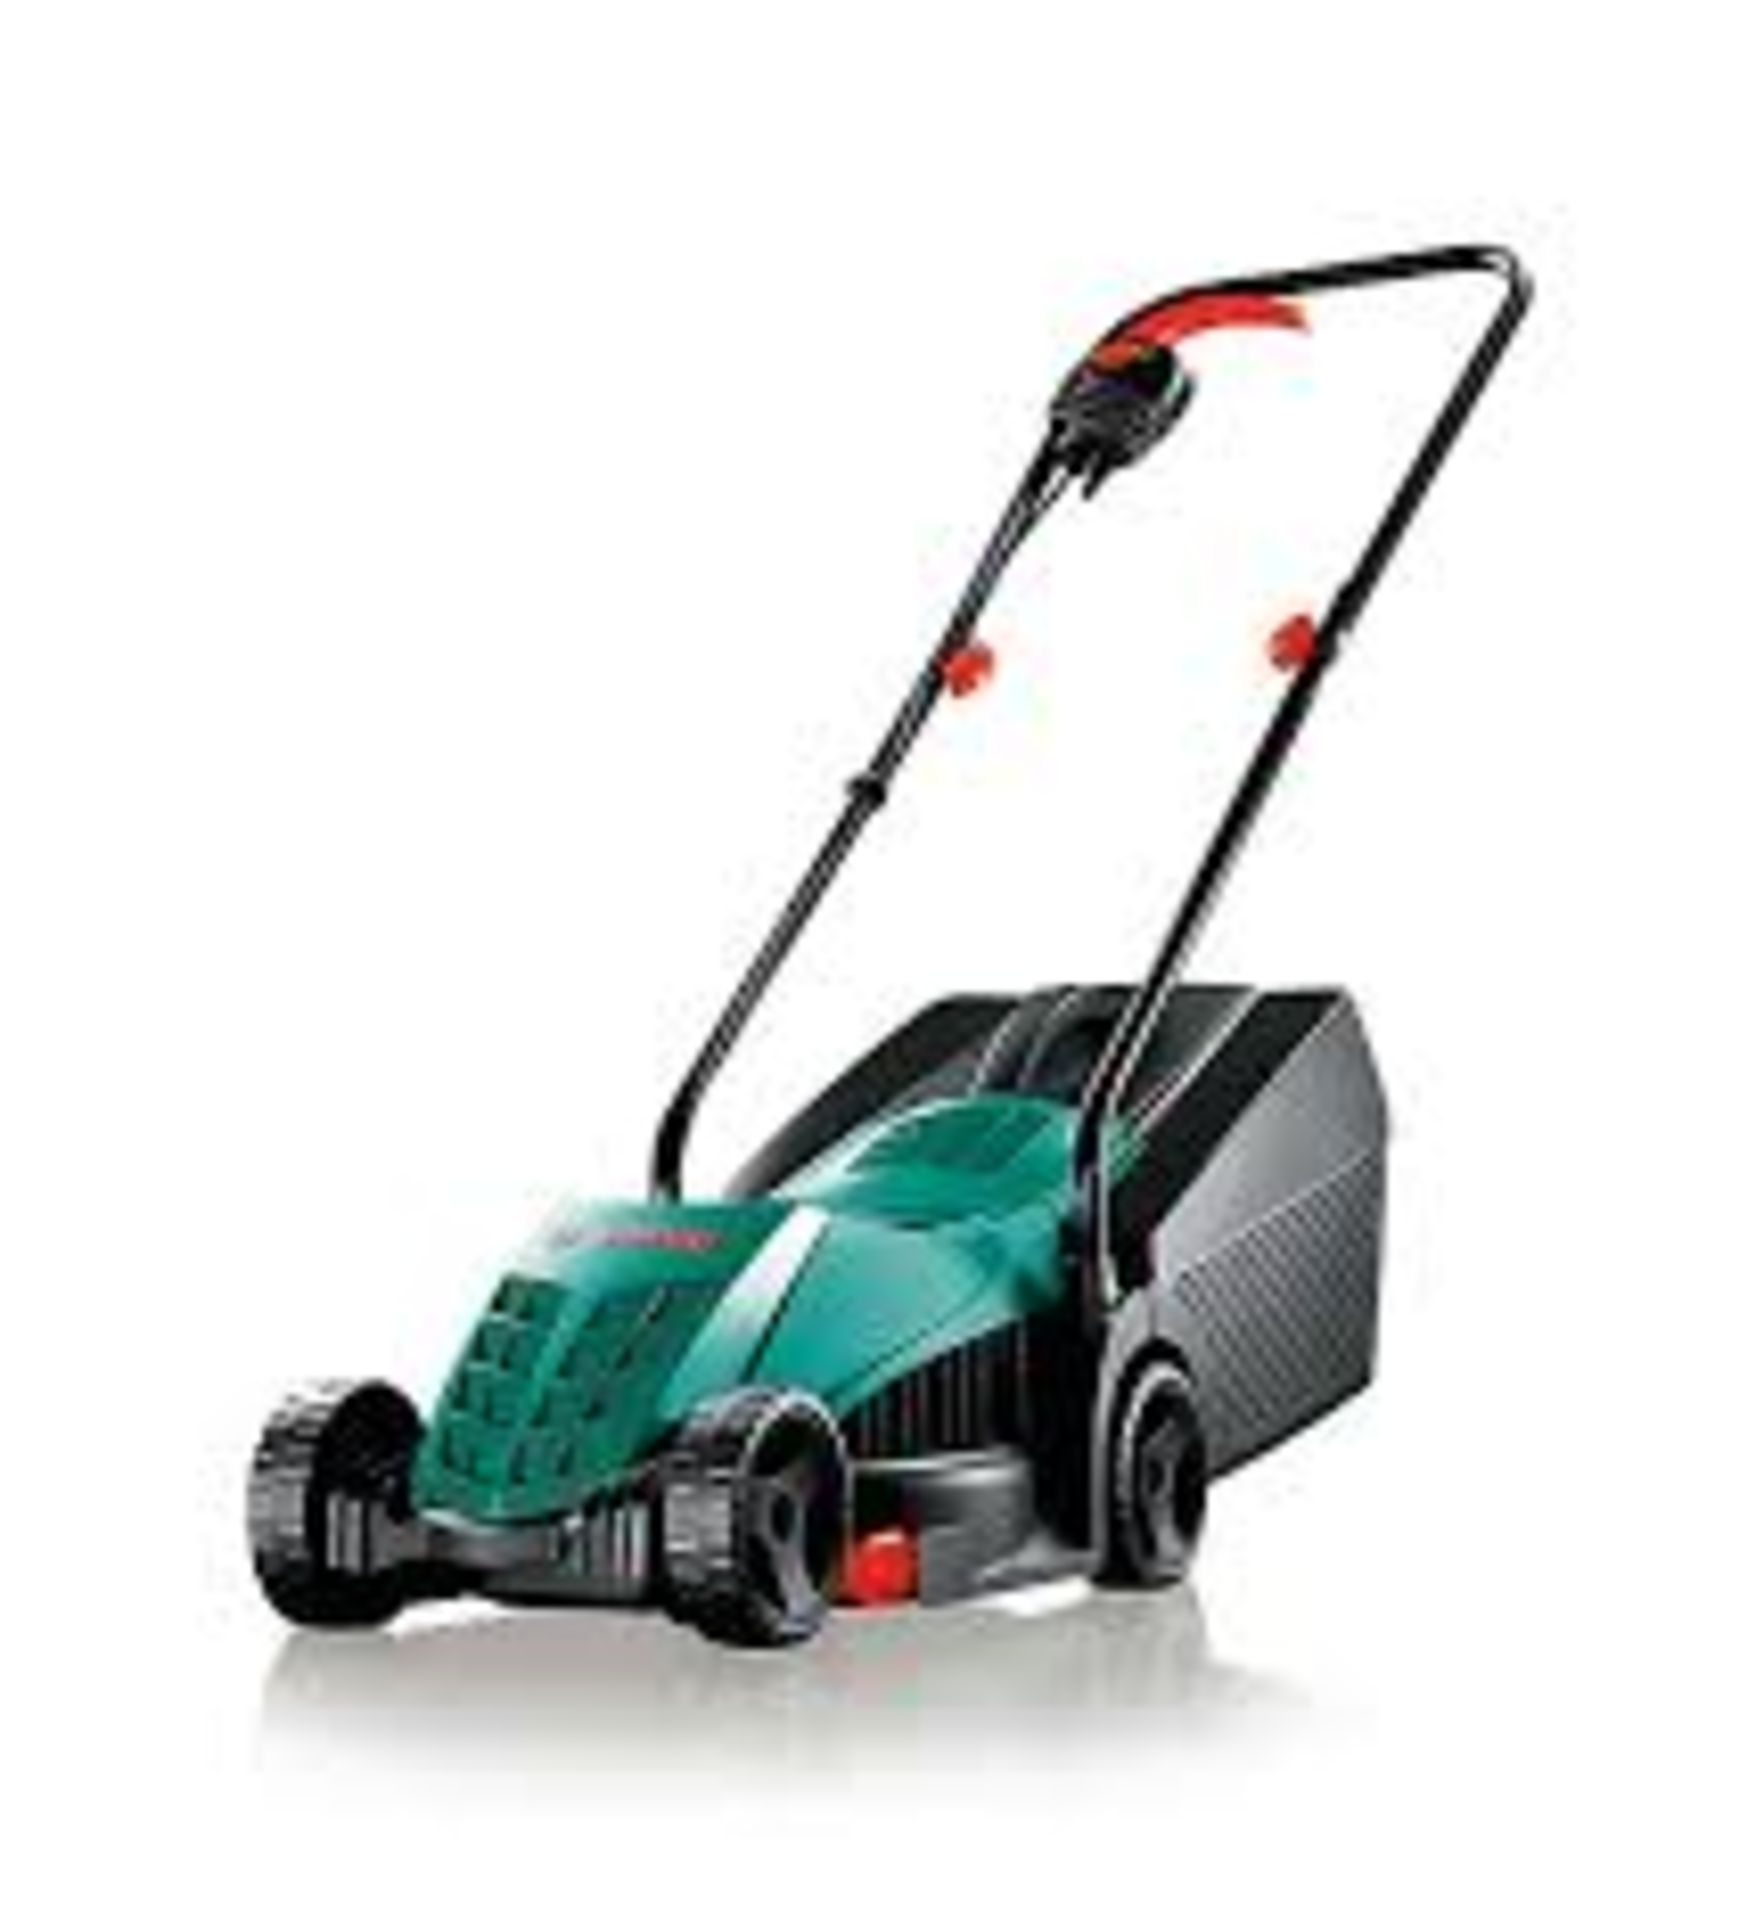 Bosch Rotak Corded Rotary Lawnmower. - S2. Lightweight and compact lawn mower that cuts right to the